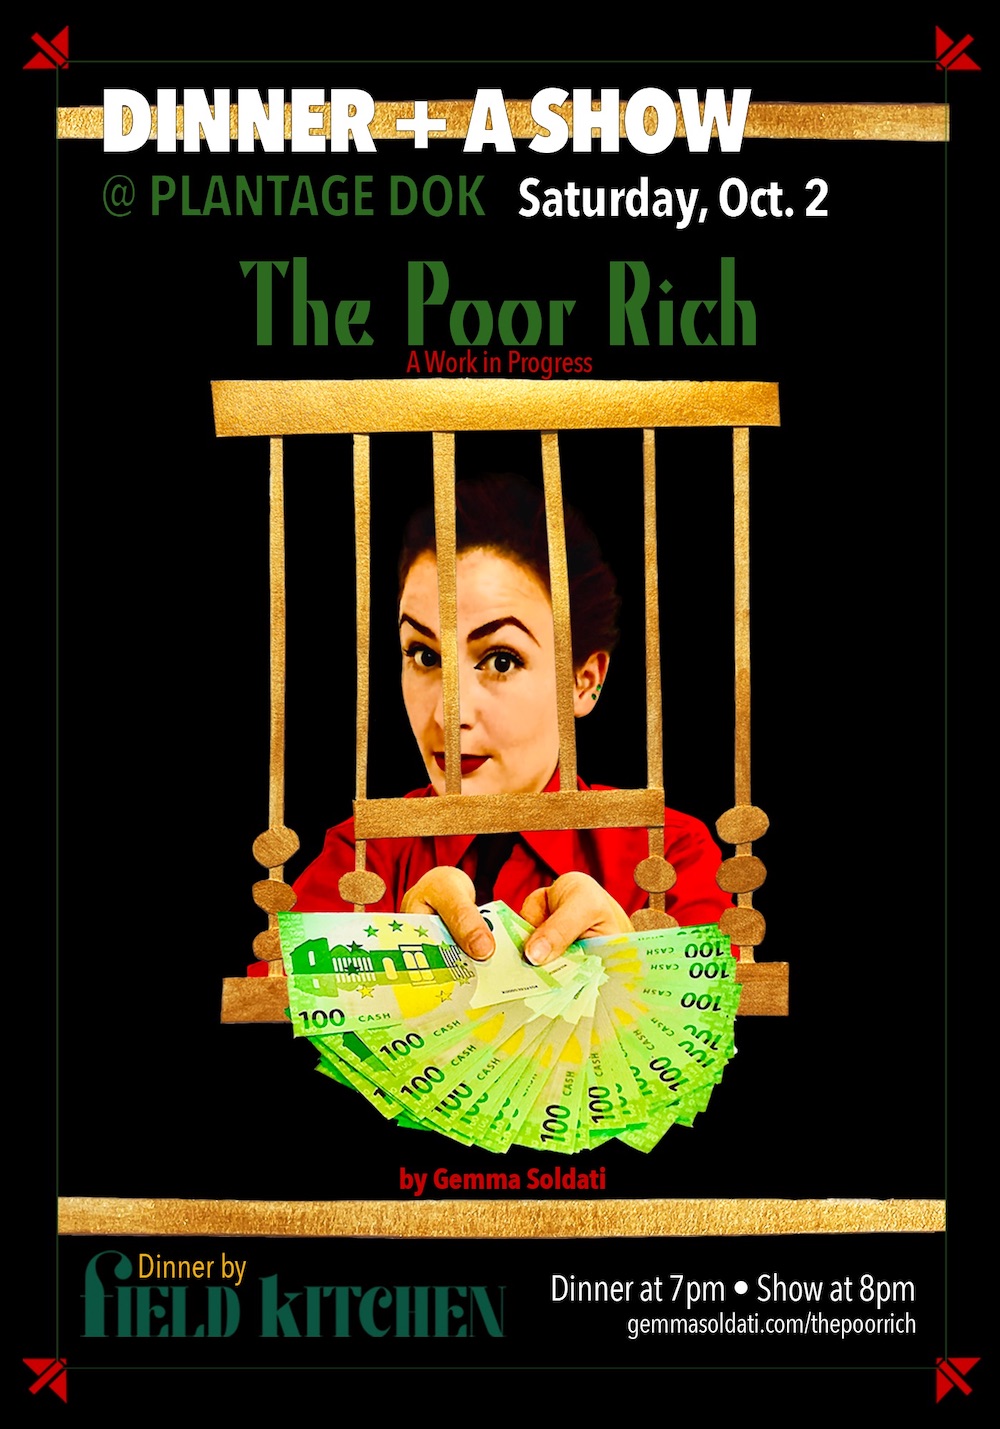 The Poor Rich by Gemma Soldati